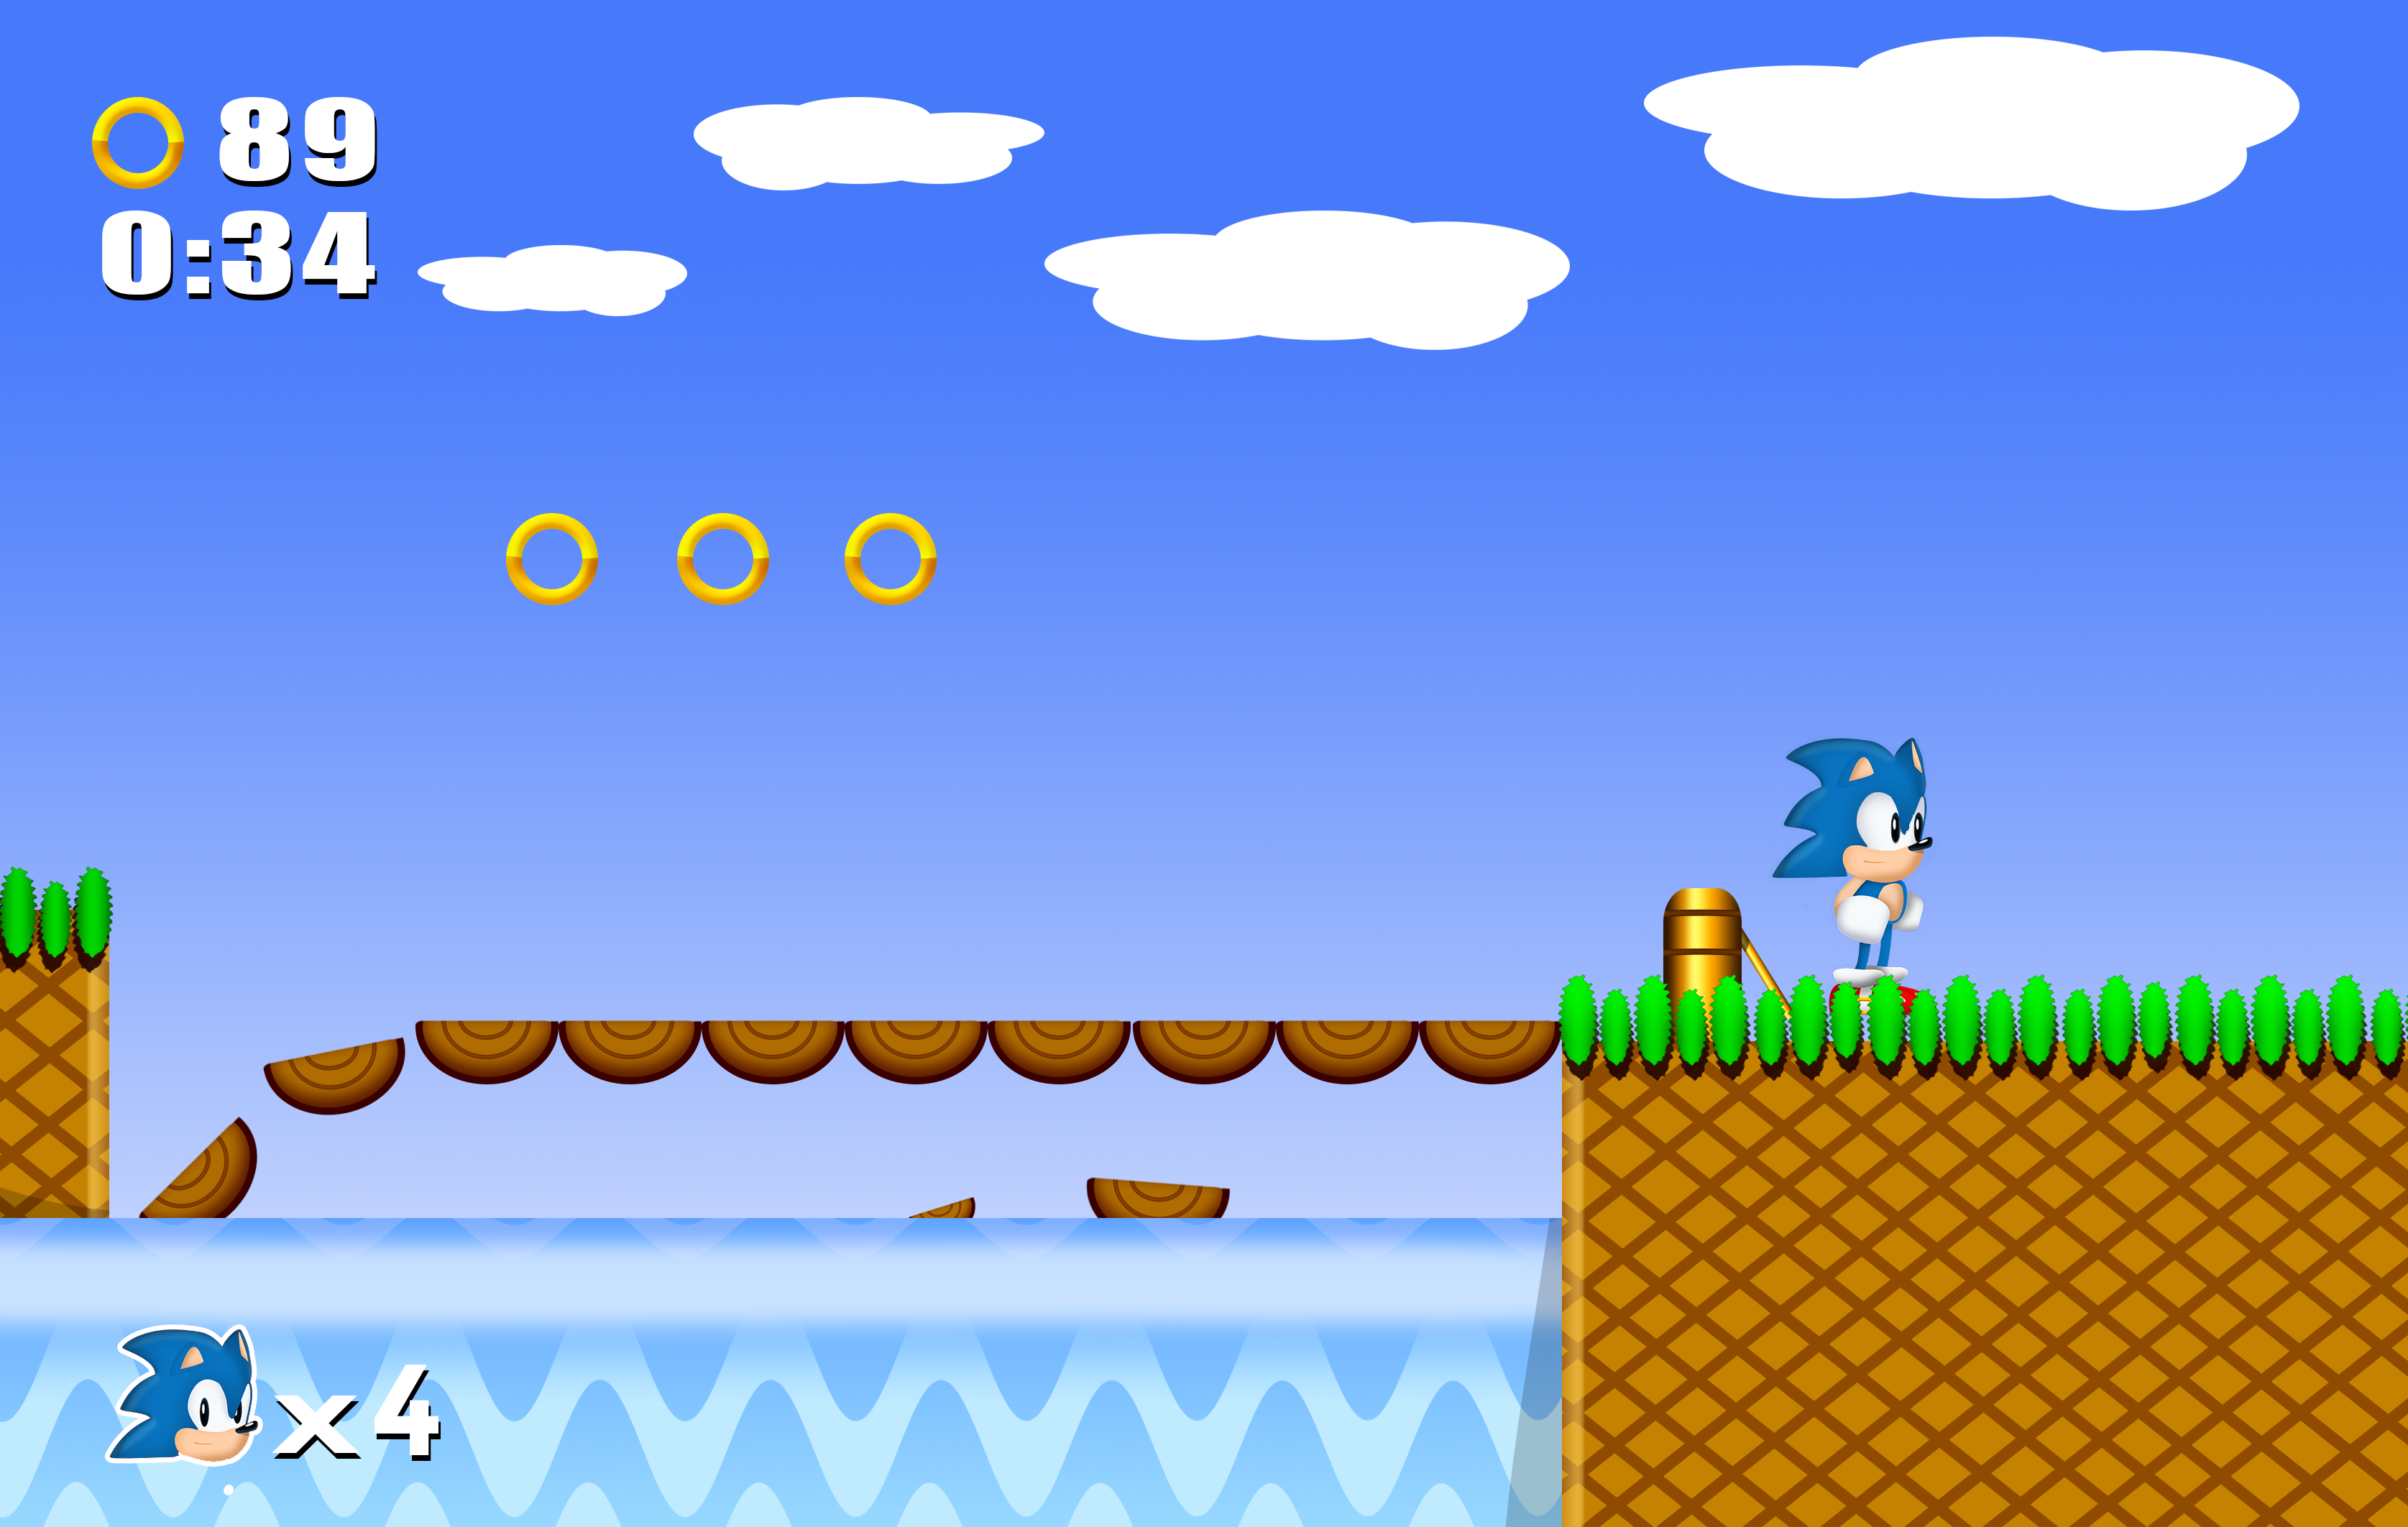 Sonic Frontiers Gameplay Mockup with new hud by NRU07 on DeviantArt